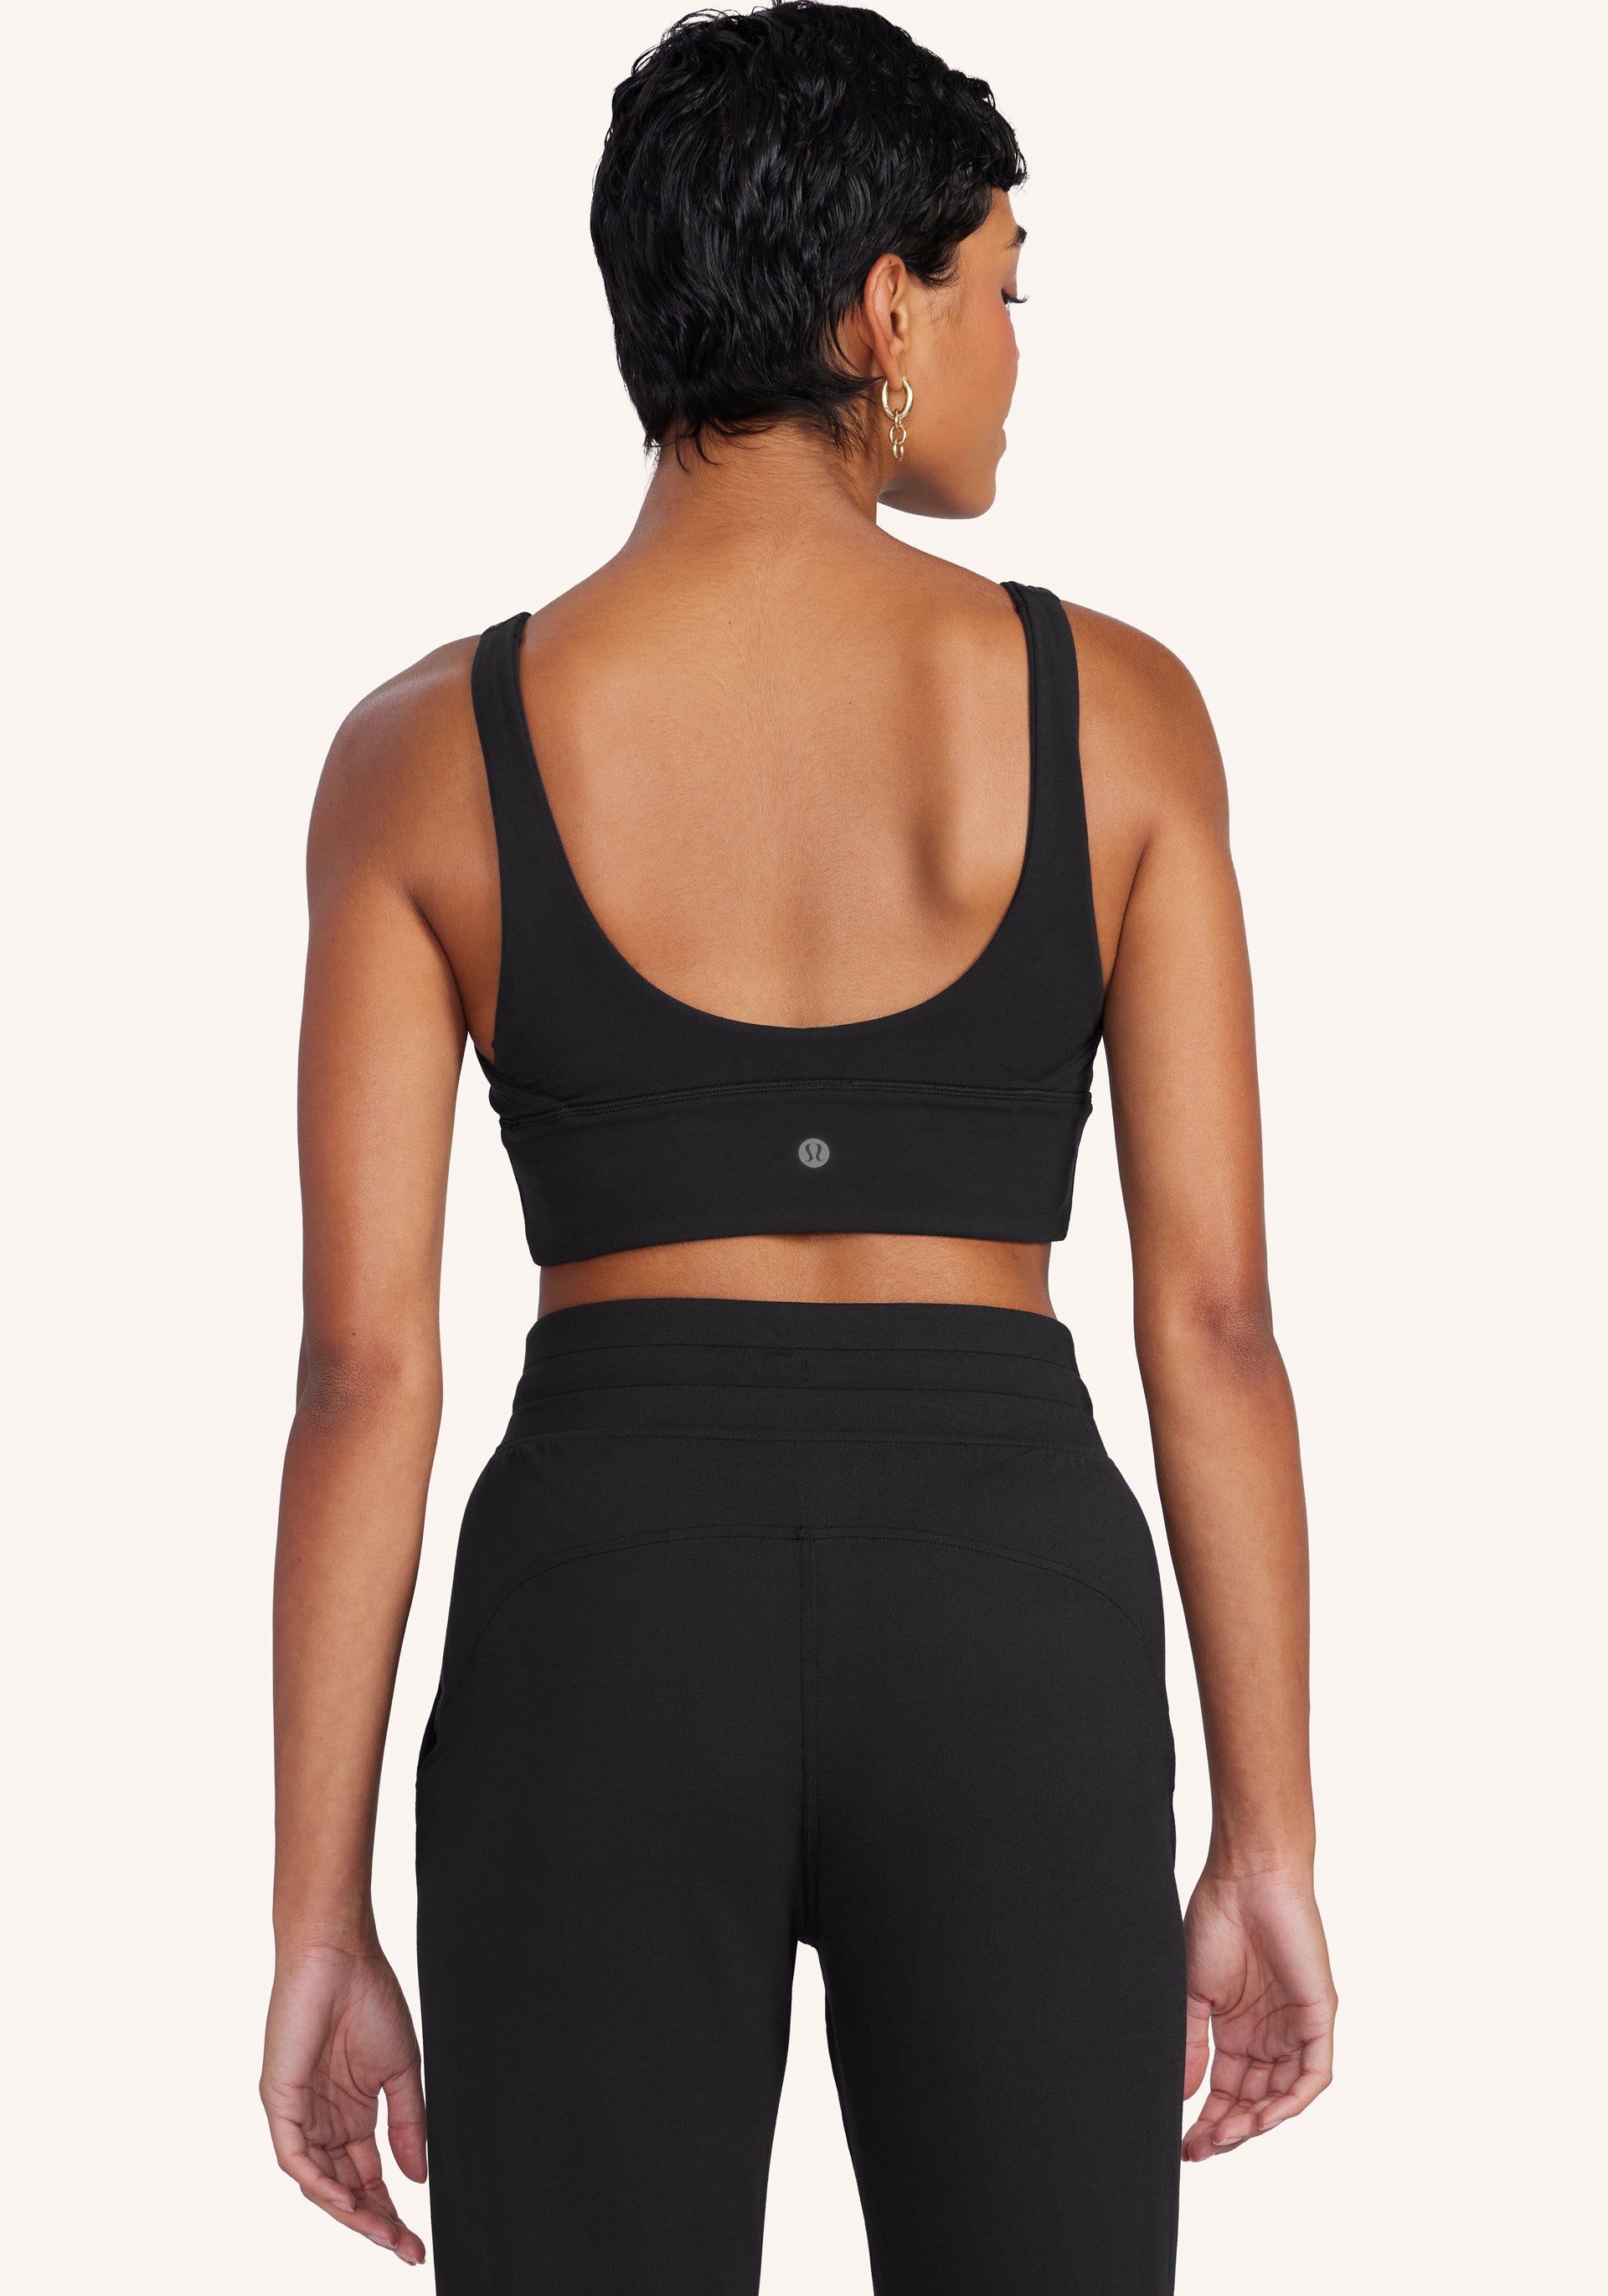 Compression Yoga Black Align Tank With Built In Bra And Strappy Back For  Women Ideal For Running, Dancing, And Activewear Workouts From Virson,  $18.36